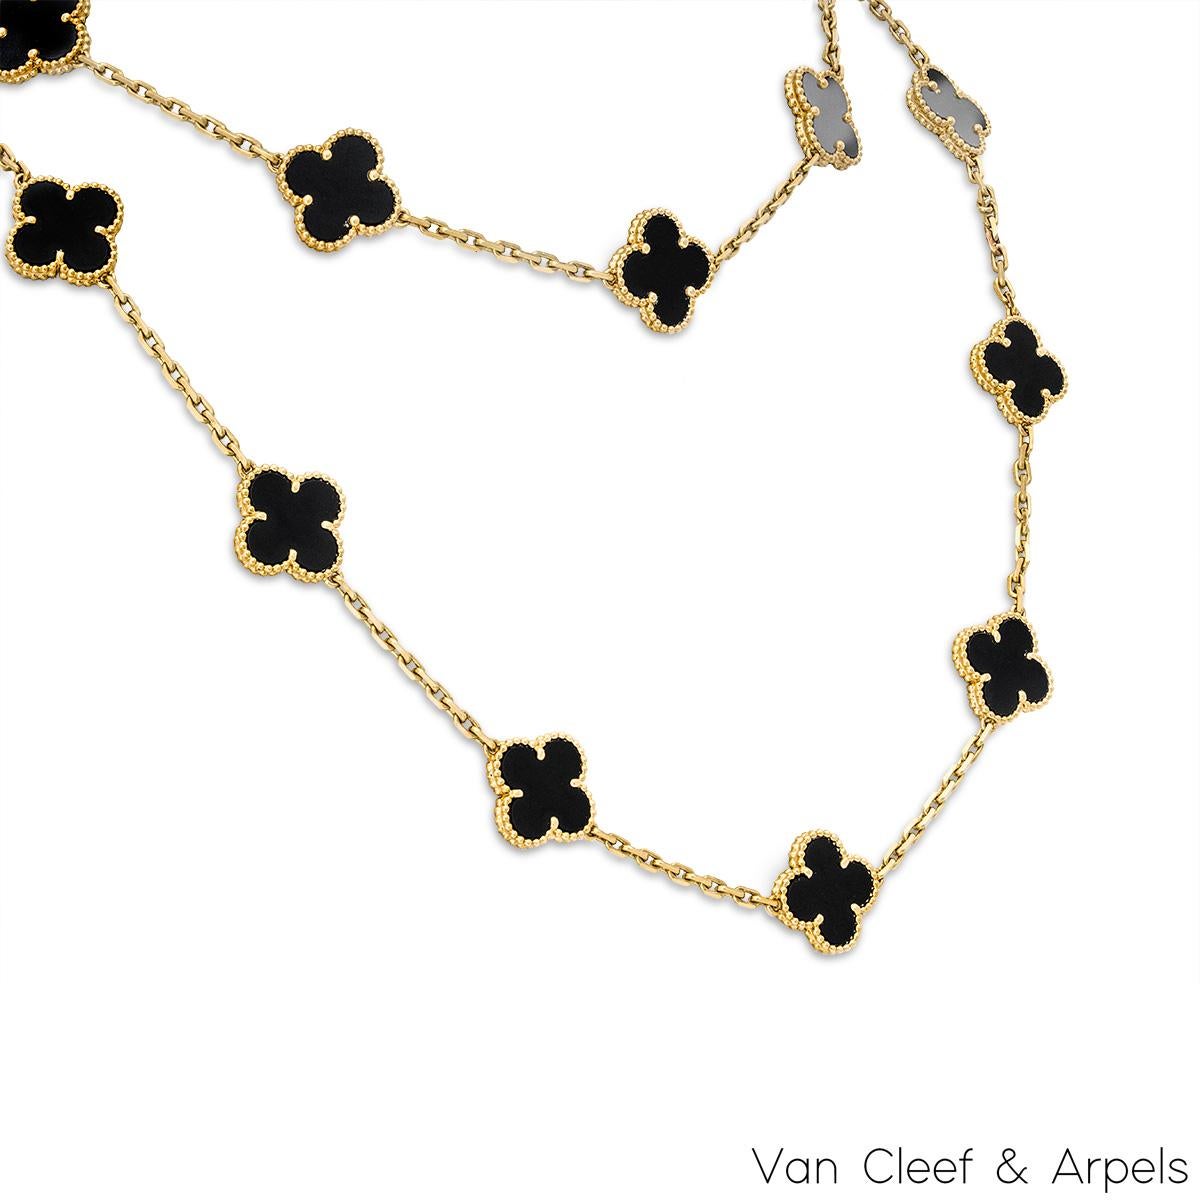 A gorgeous 18k yellow gold necklace by Van Cleef & Arpels from the Vintage Alhambra collection. The necklace features 20 iconic 4 leaf clover motifs, each set with a beaded edge and an onyx inlay, set throughout the length of the chain. The trace